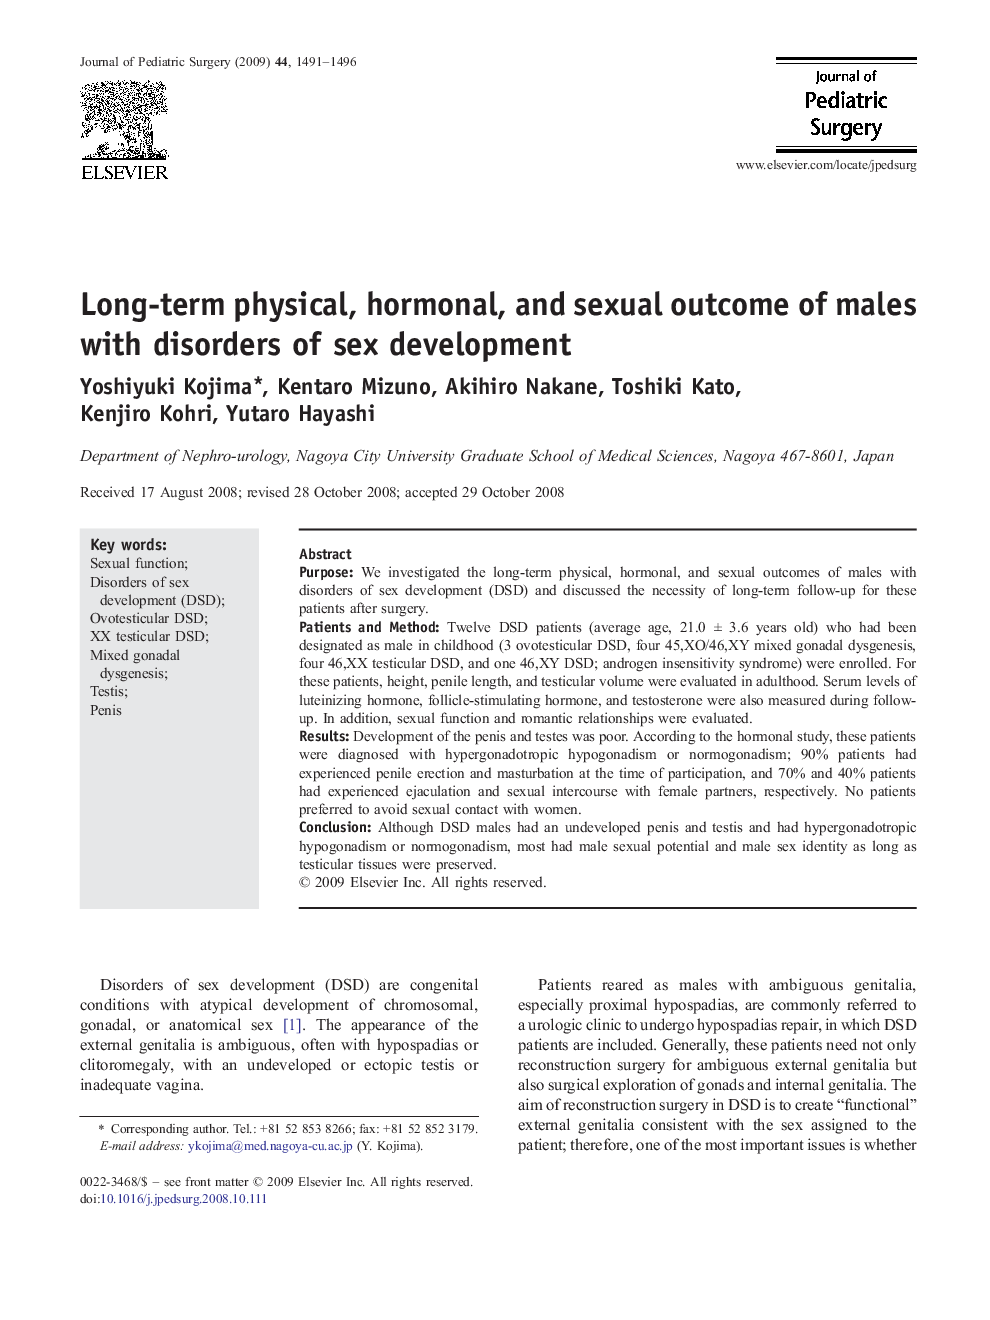 Long-term physical, hormonal, and sexual outcome of males with disorders of sex development